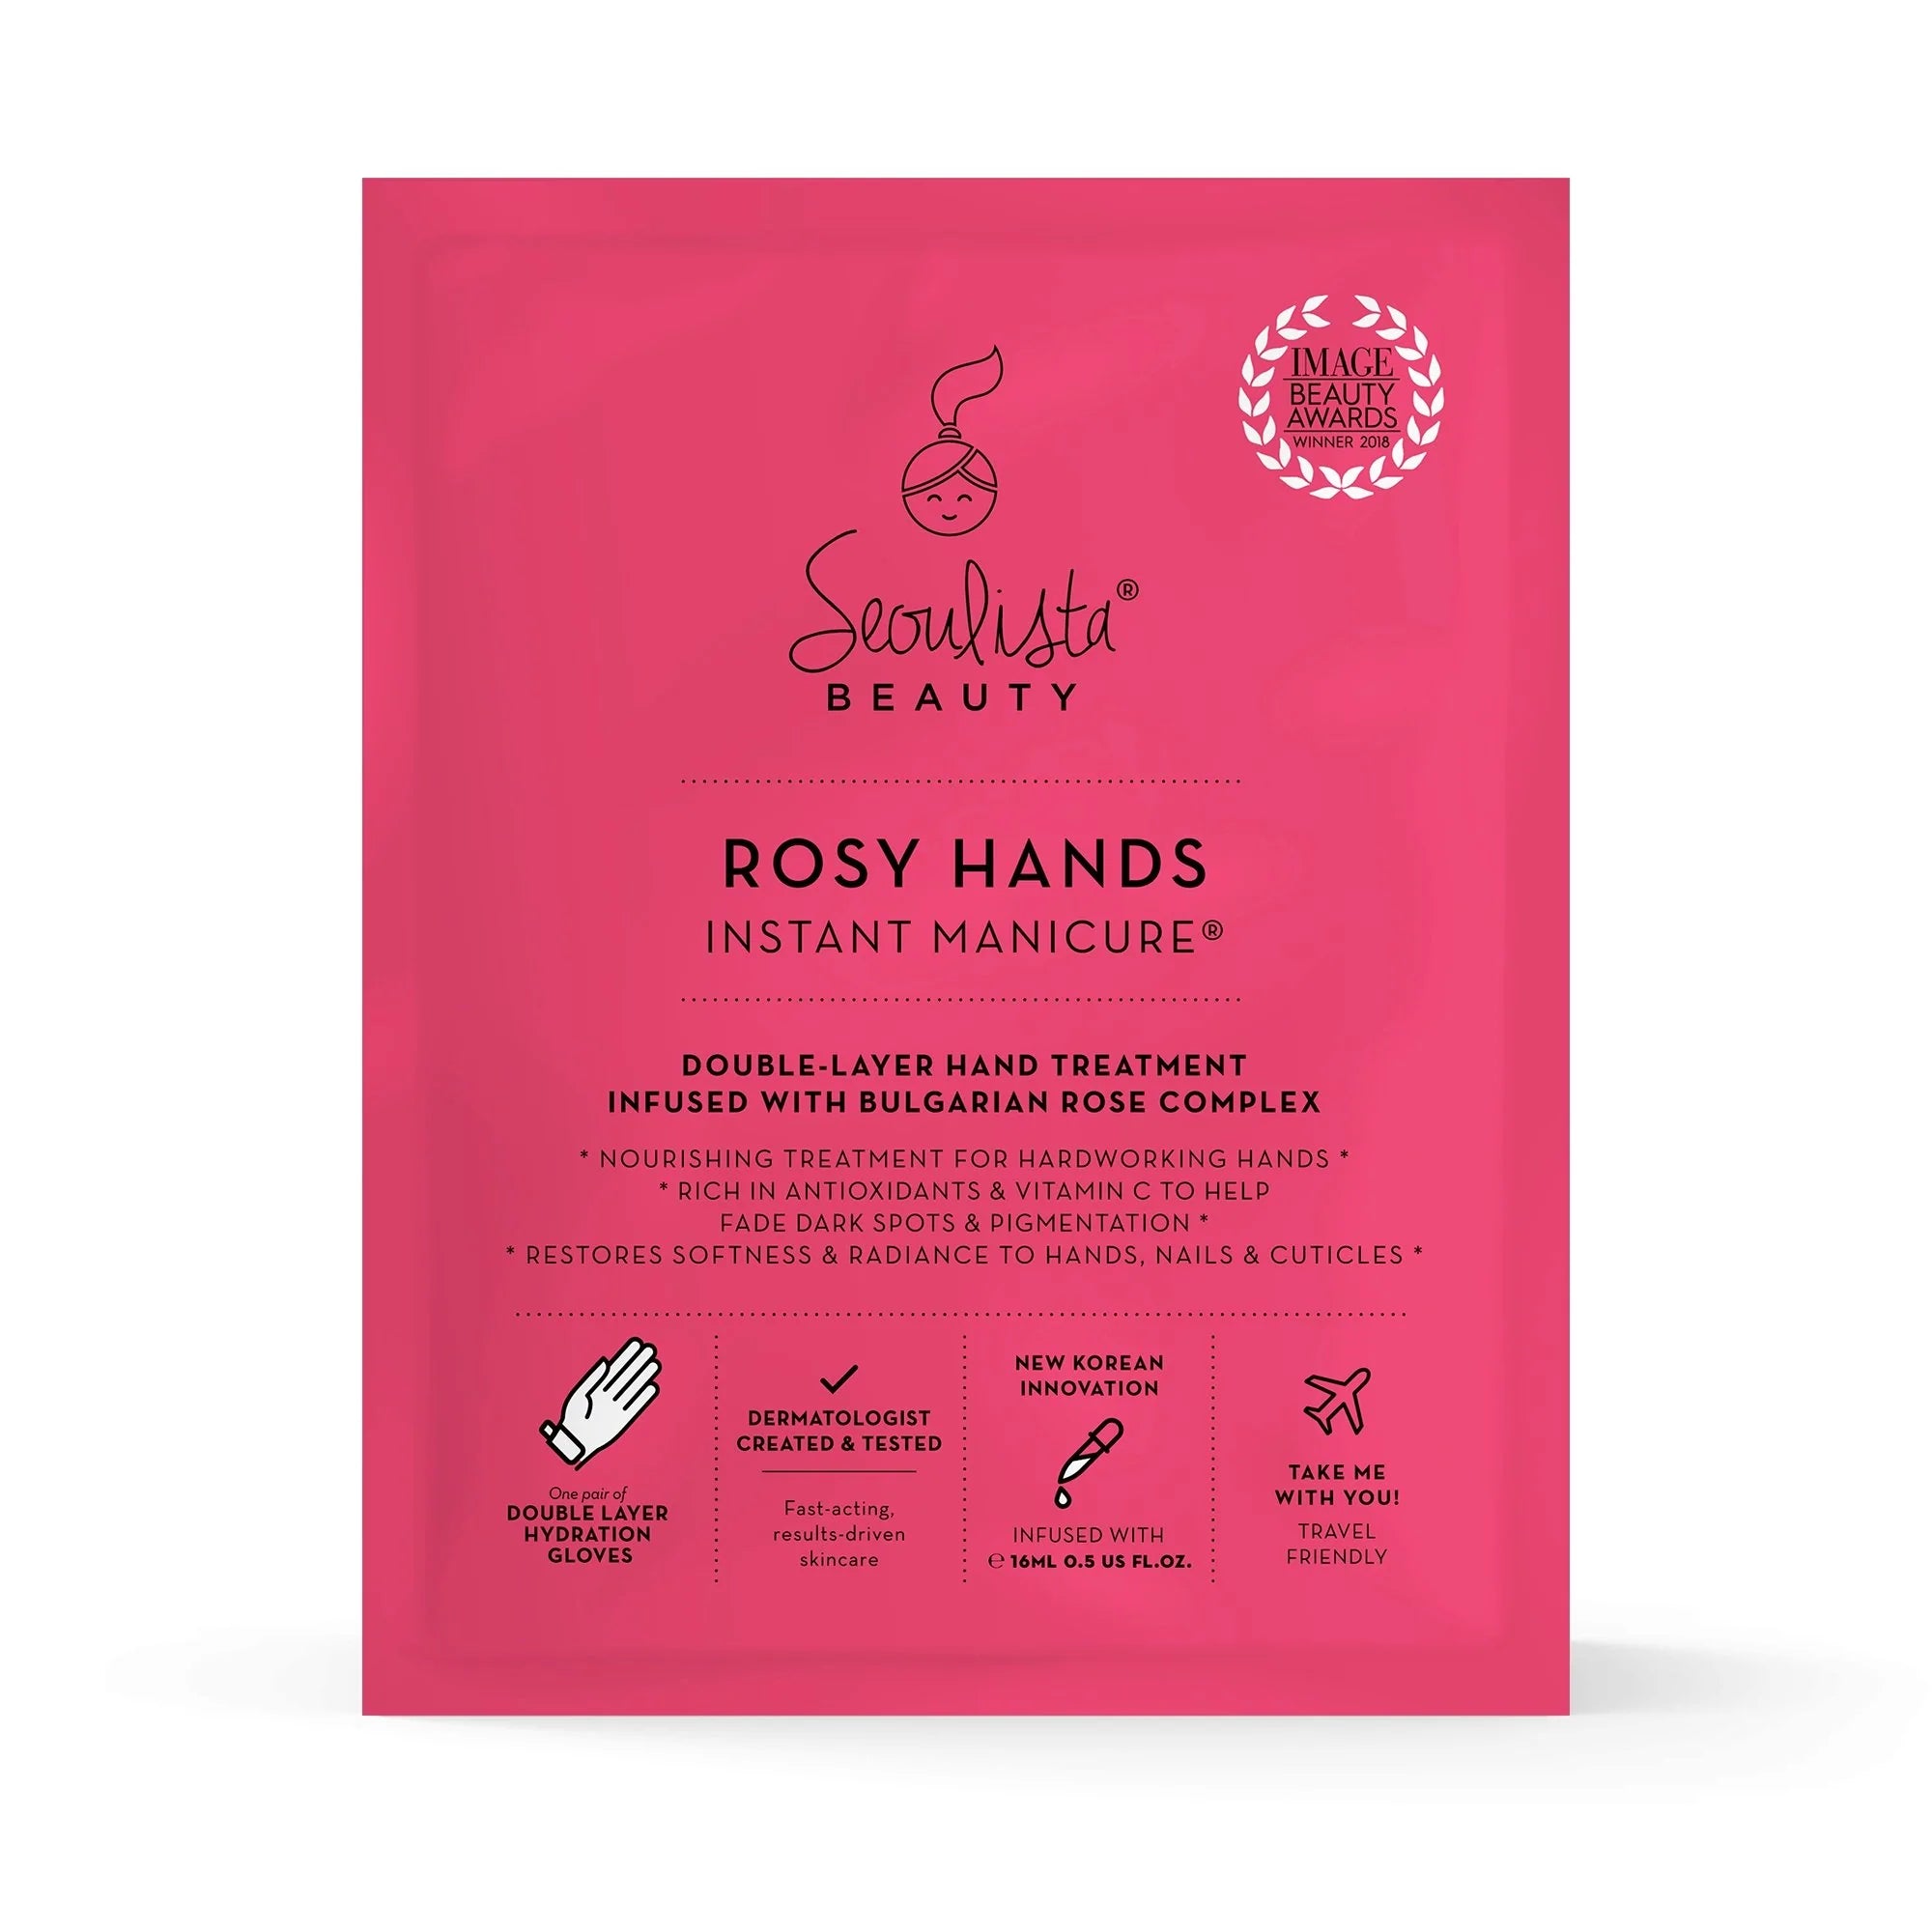 Seoulista Rosy Hands Instant Manicure Hand Treatment Mask